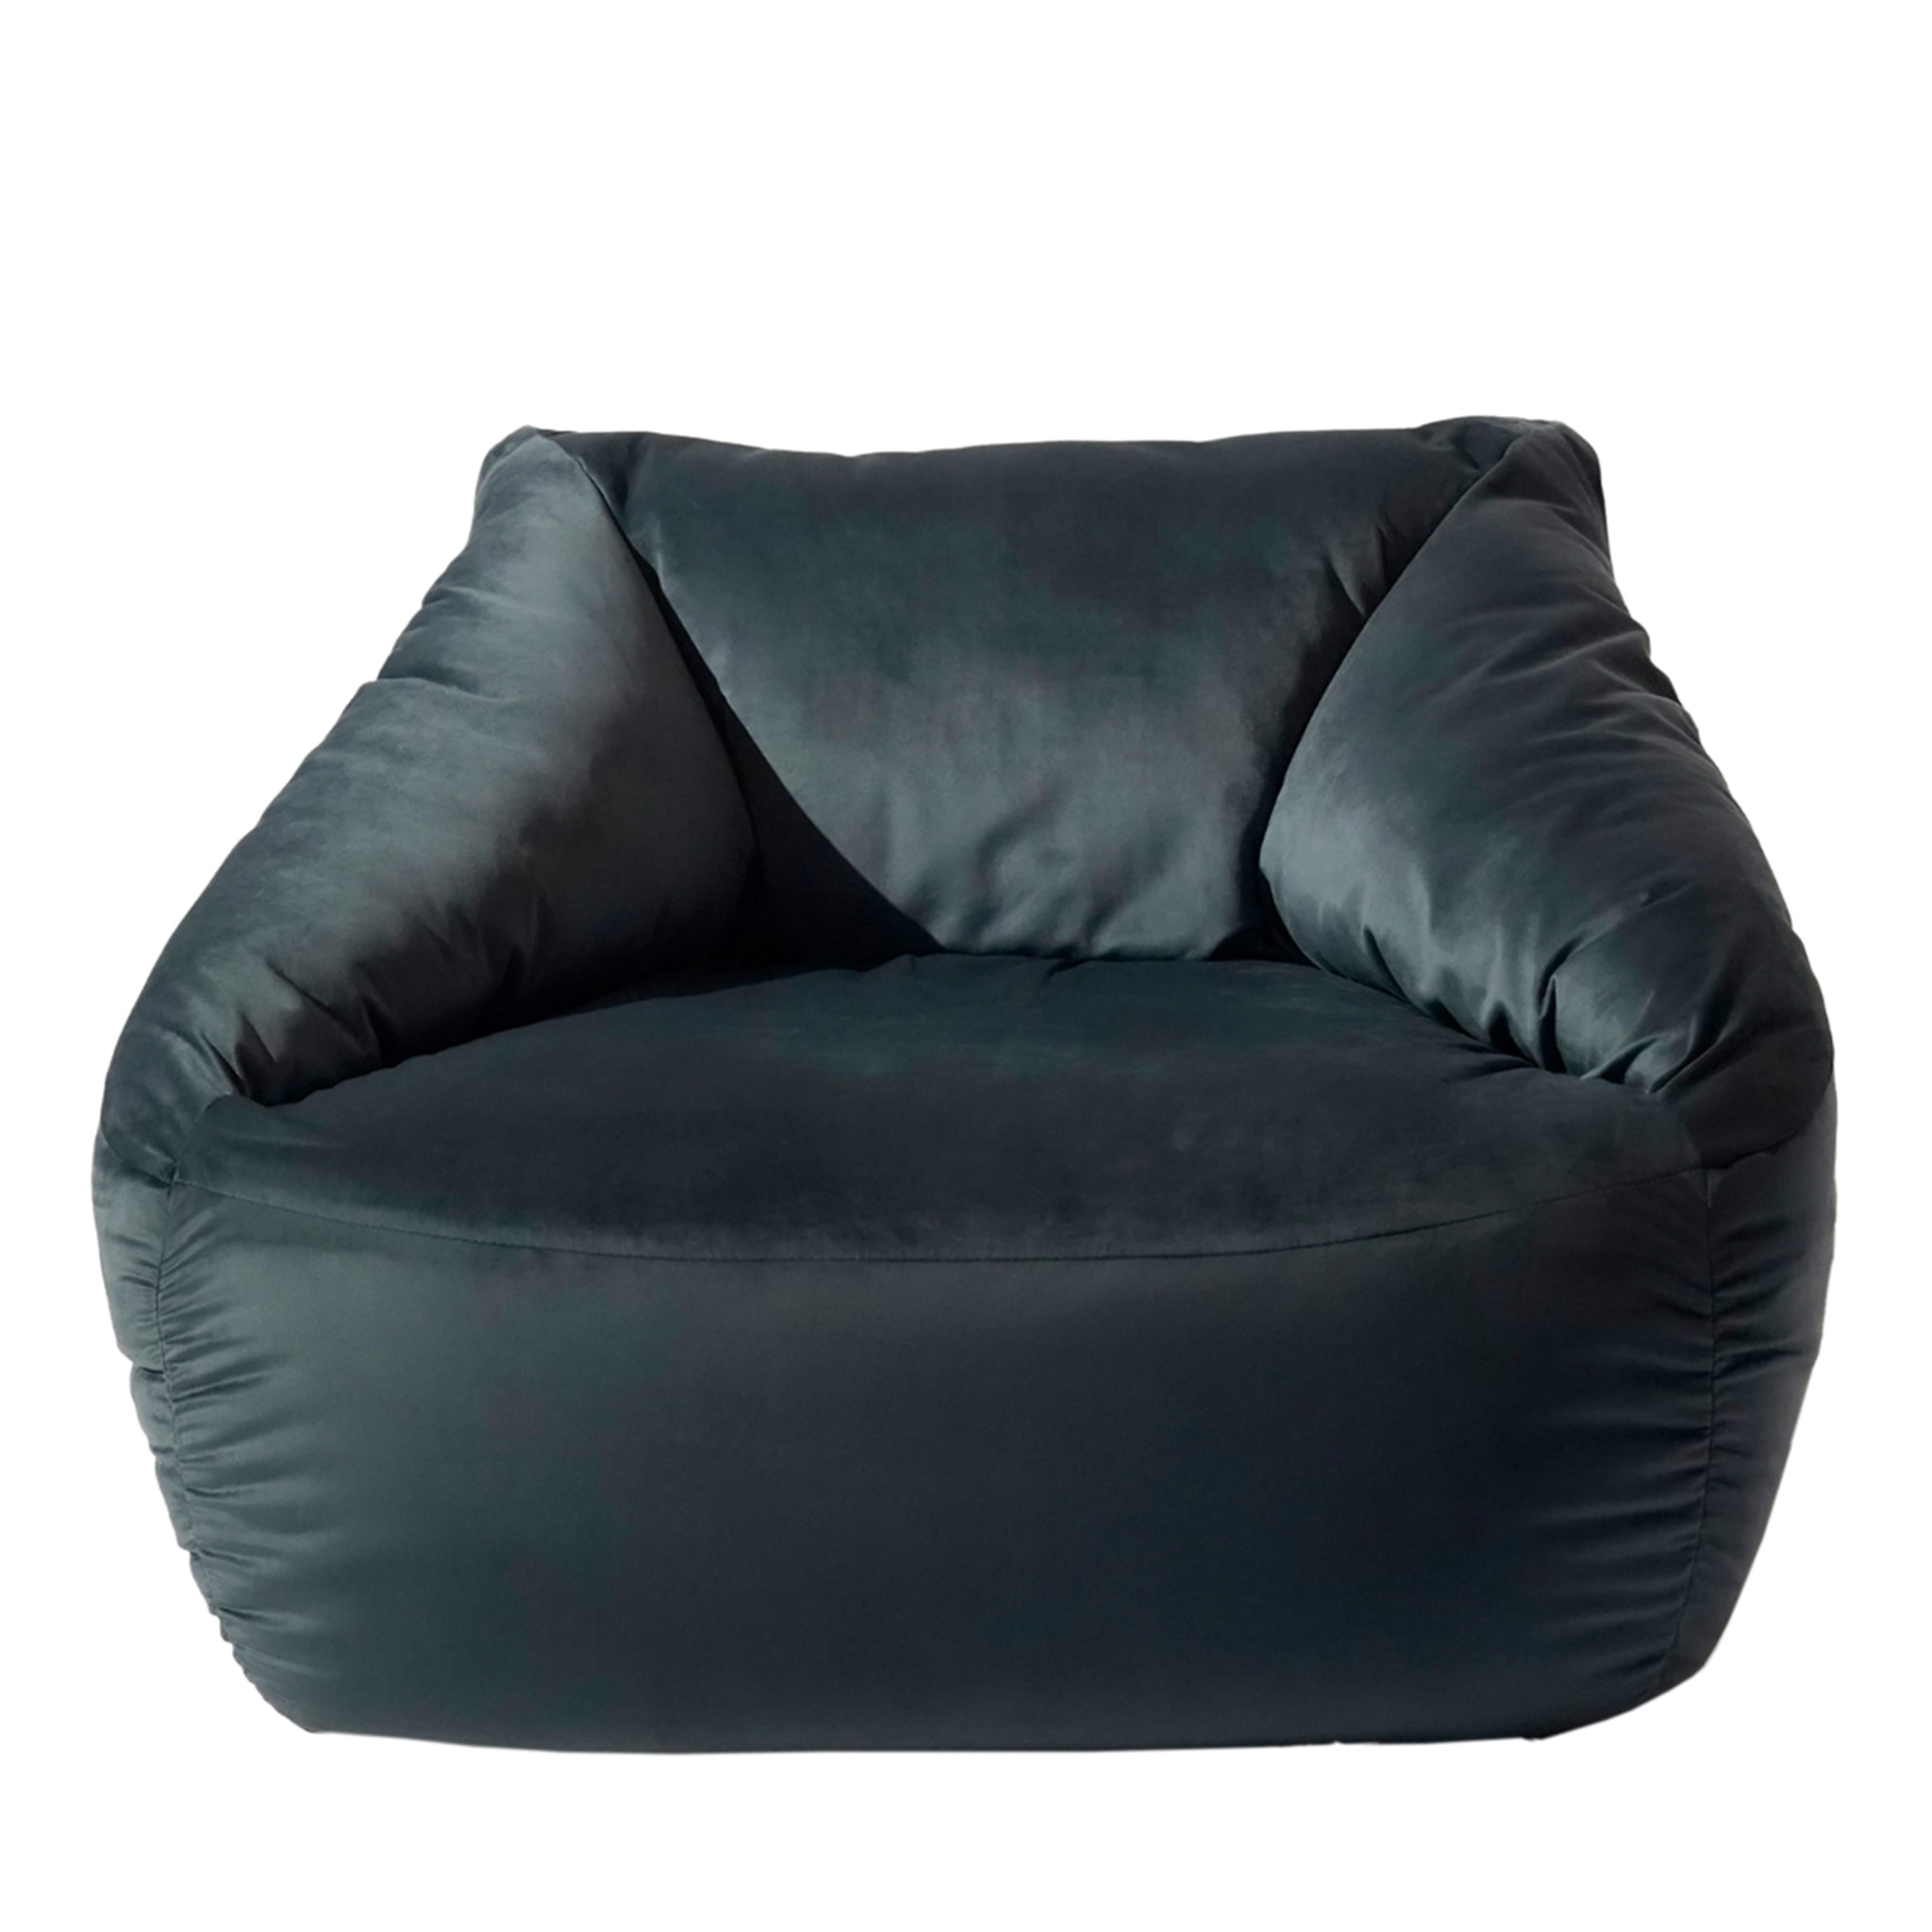 Botero Armchair by Marco and Giulio Mantellassi  - Main view